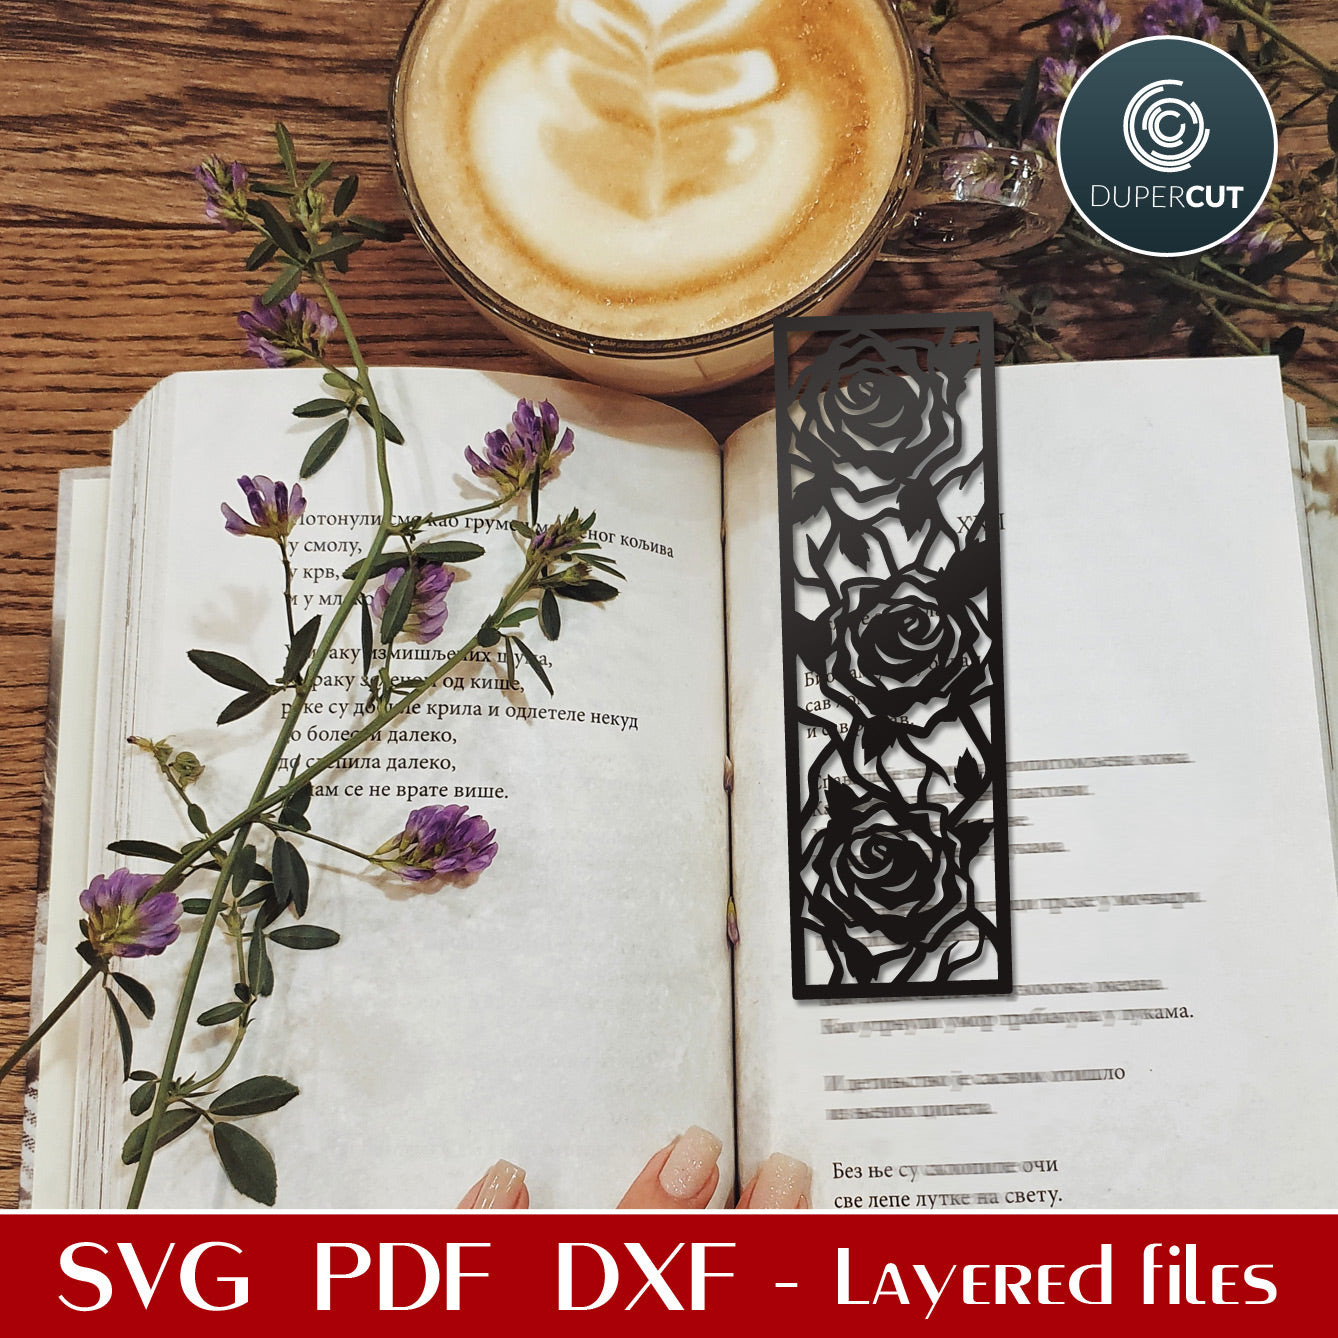 DIY roses detailed bookmark - SVG DXF vector files for laser cutting machines, Glowforge, Cricut, Silhouette, CNC plasma machines by www.DuperCut.com